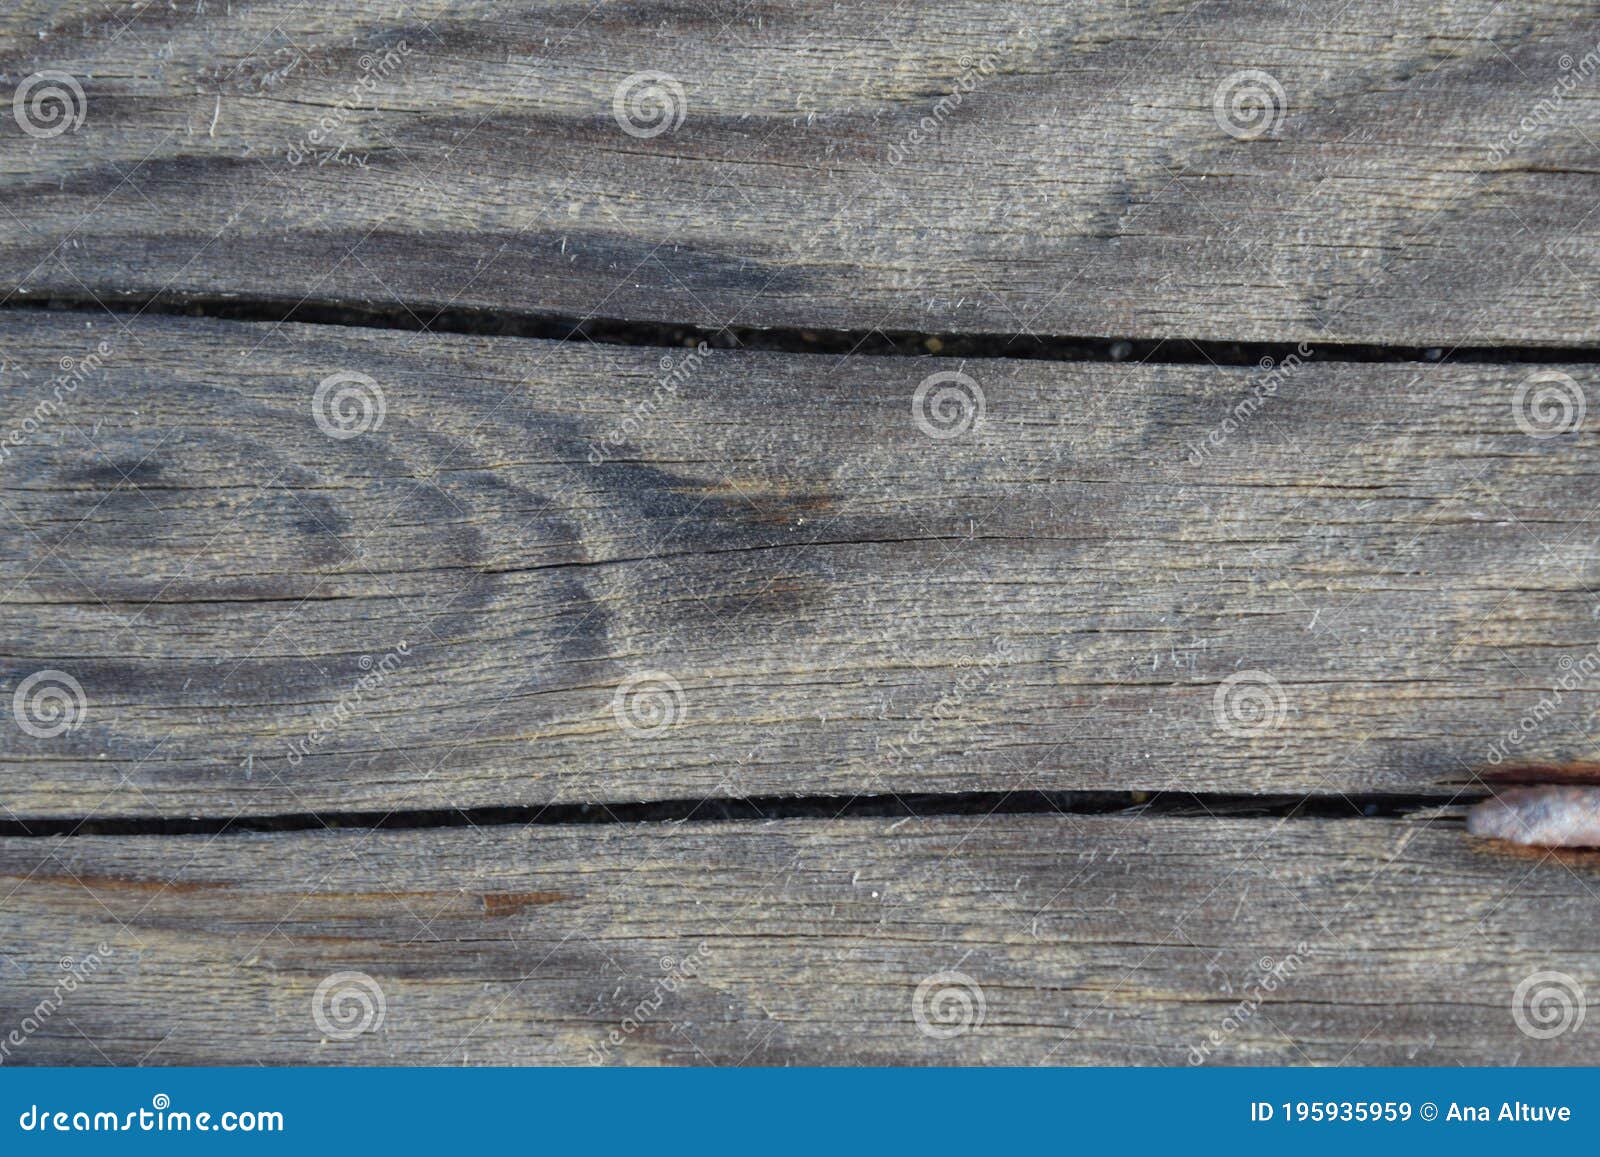 wood close up texture old wood